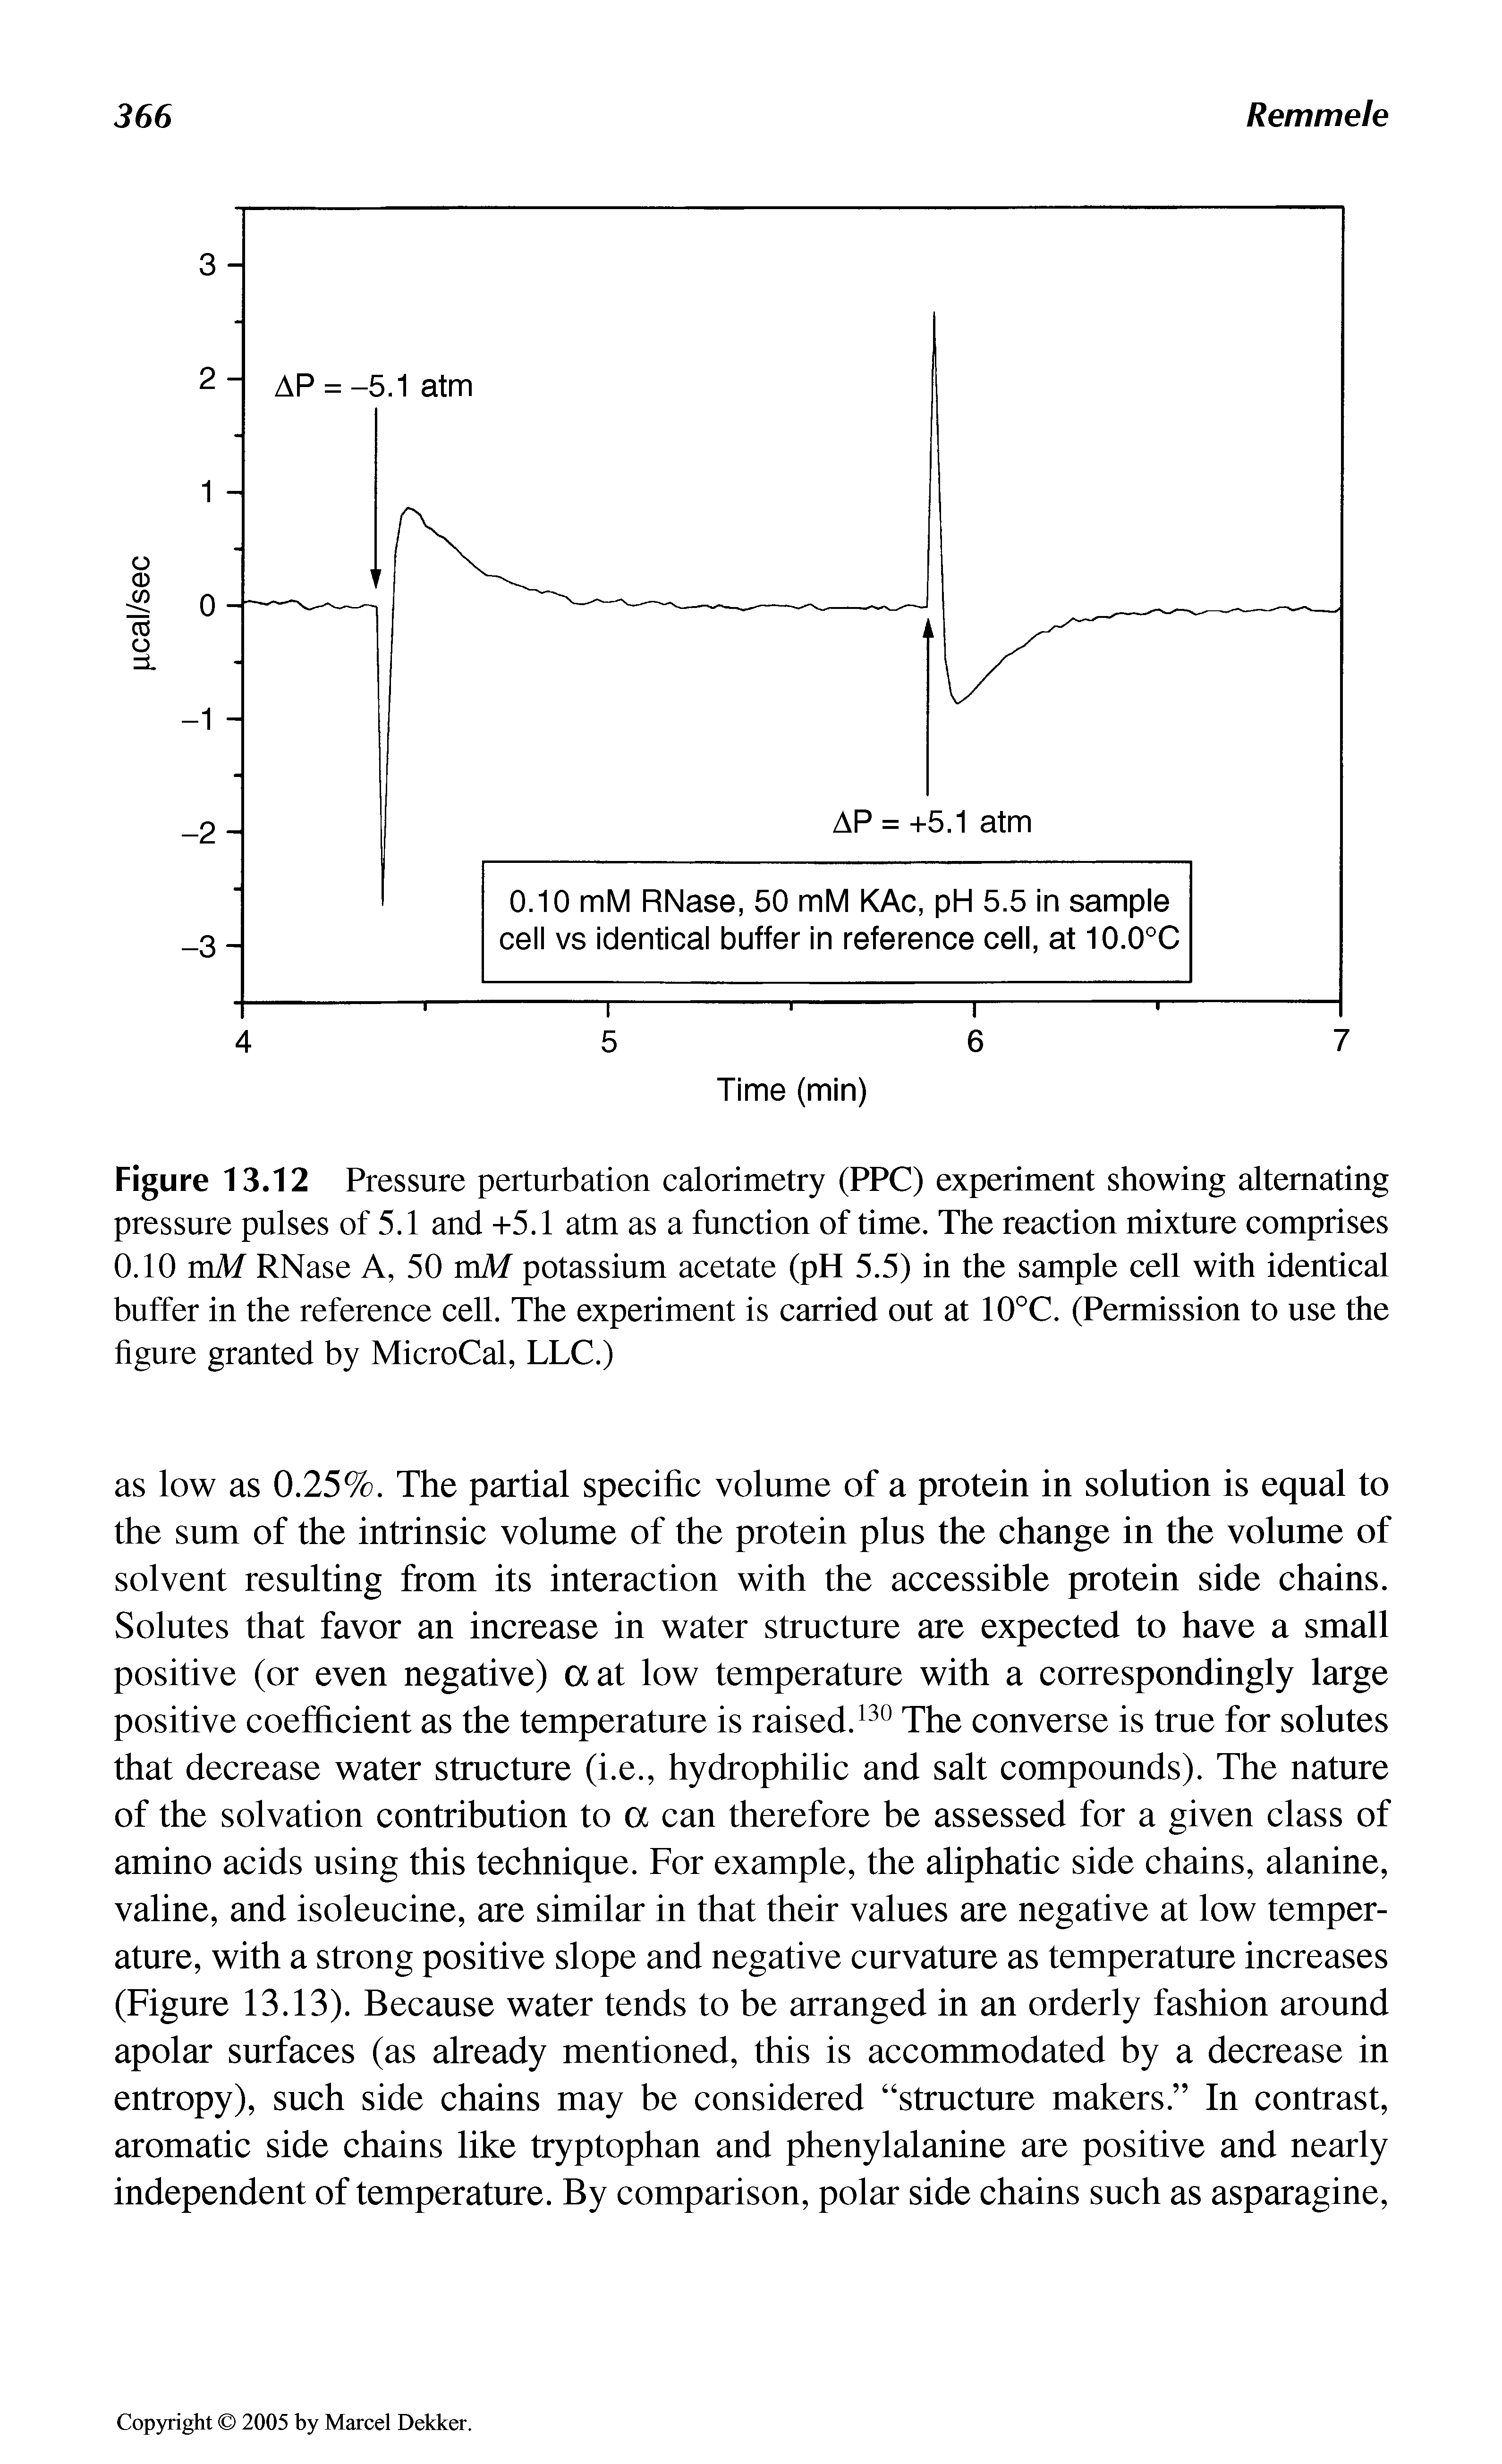 Figure 13.12 Pressure perturbation calorimetry (PPC) experiment showing alternating pressure pulses of 5.1 and +5.1 atm as a function of time. The reaction mixture comprises 0.10 mM RNase A, 50 mM potassium acetate (pH 5.5) in the sample cell with identical buffer in the reference cell. The experiment is carried out at 10°C. (Permission to use the figure granted by MicroCal, LLC.)...